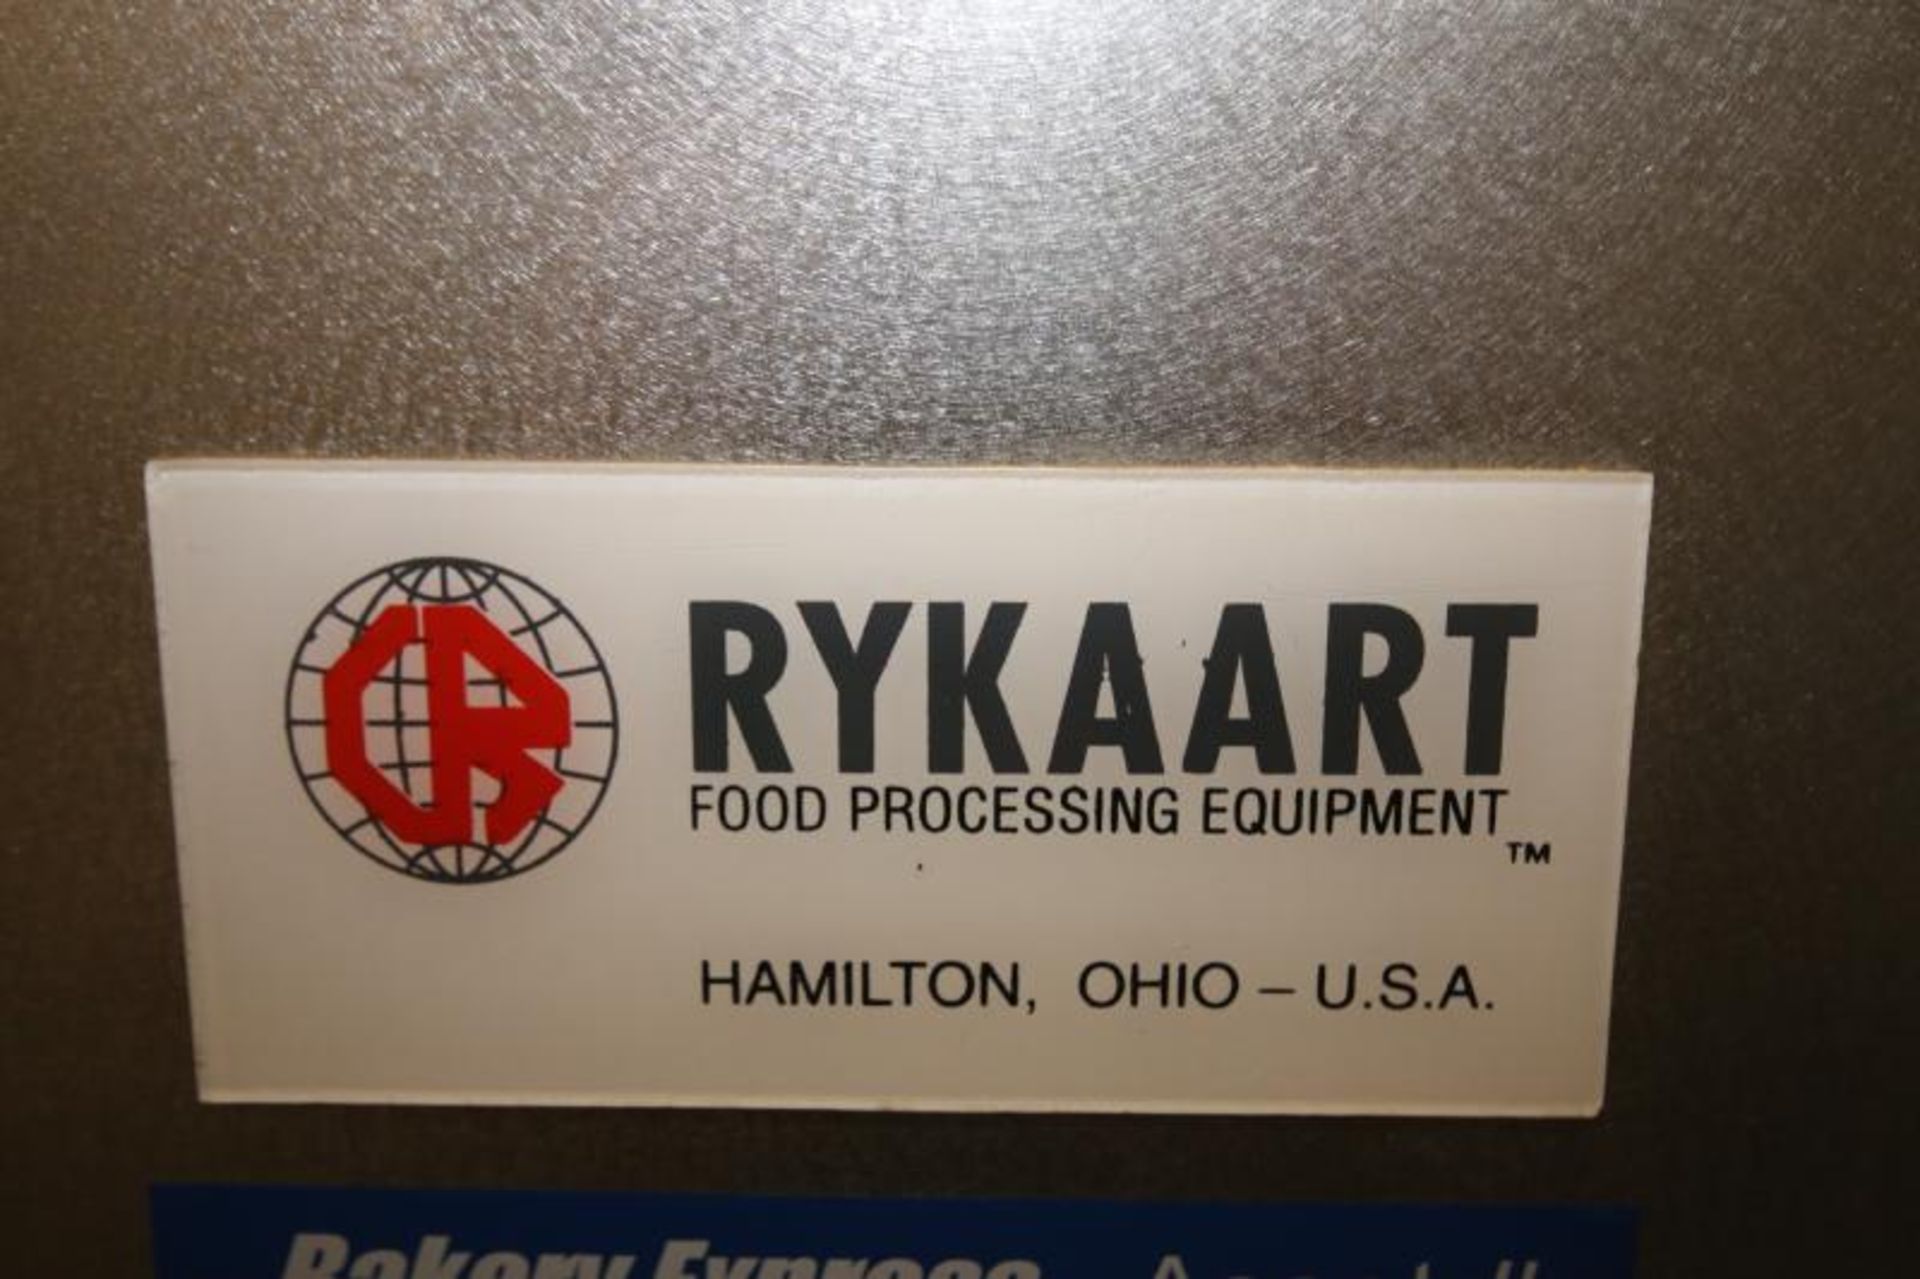 Rykaart 24" W S/S Sheeter, with 5 ft L x 24" W Belt Conveyor, S/S Flour Duster, Control Box with (2) - Image 11 of 11